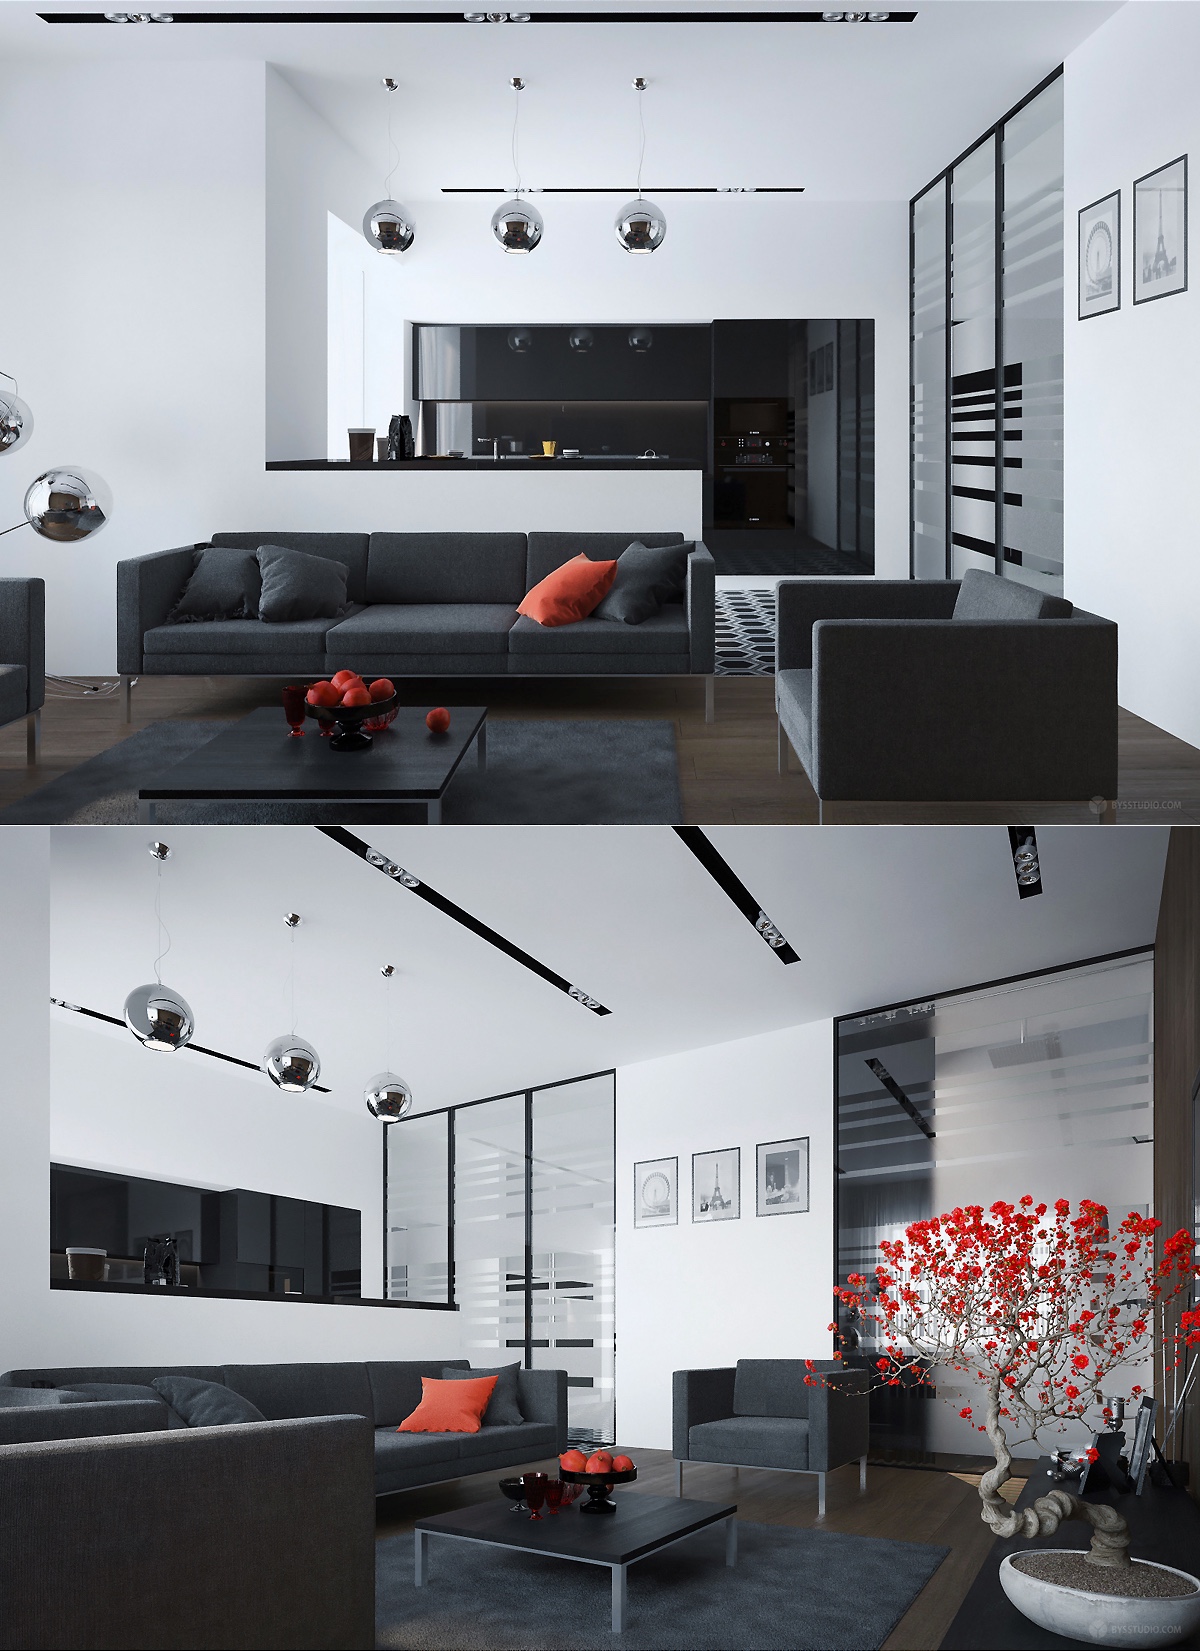 modern black living room "width =" 1200 "height =" 1651 "srcset =" https://mileray.com/wp-content/uploads/2020/05/1588517861_420_Design-Living-Room-With-Relaxing-Modern-and-Gorgeous-Shades.jpg 1200w, https: // myfashionos. com / wp-content / uploads / 2016/07 / Build-Your-Space-218x300.jpg 218w, https://mileray.com/wp-content/uploads/2016/07/Build-Your-Space-768x1057 .jpg 768w, https://mileray.com/wp-content/uploads/2016/07/Build-Your-Space-744x1024.jpg 744w, https://mileray.com/wp-content/uploads/2016/07 / Build -Your-Space-696x958.jpg 696w, https://mileray.com/wp-content/uploads/2016/07/Build-Your-Space-1068x1469.jpg 1068w, https://mileray.com/wp -content / uploads / 2016/07 / Build-Your-Space-305x420.jpg 305w "sizes =" (maximum width: 1200px) 100vw, 1200px